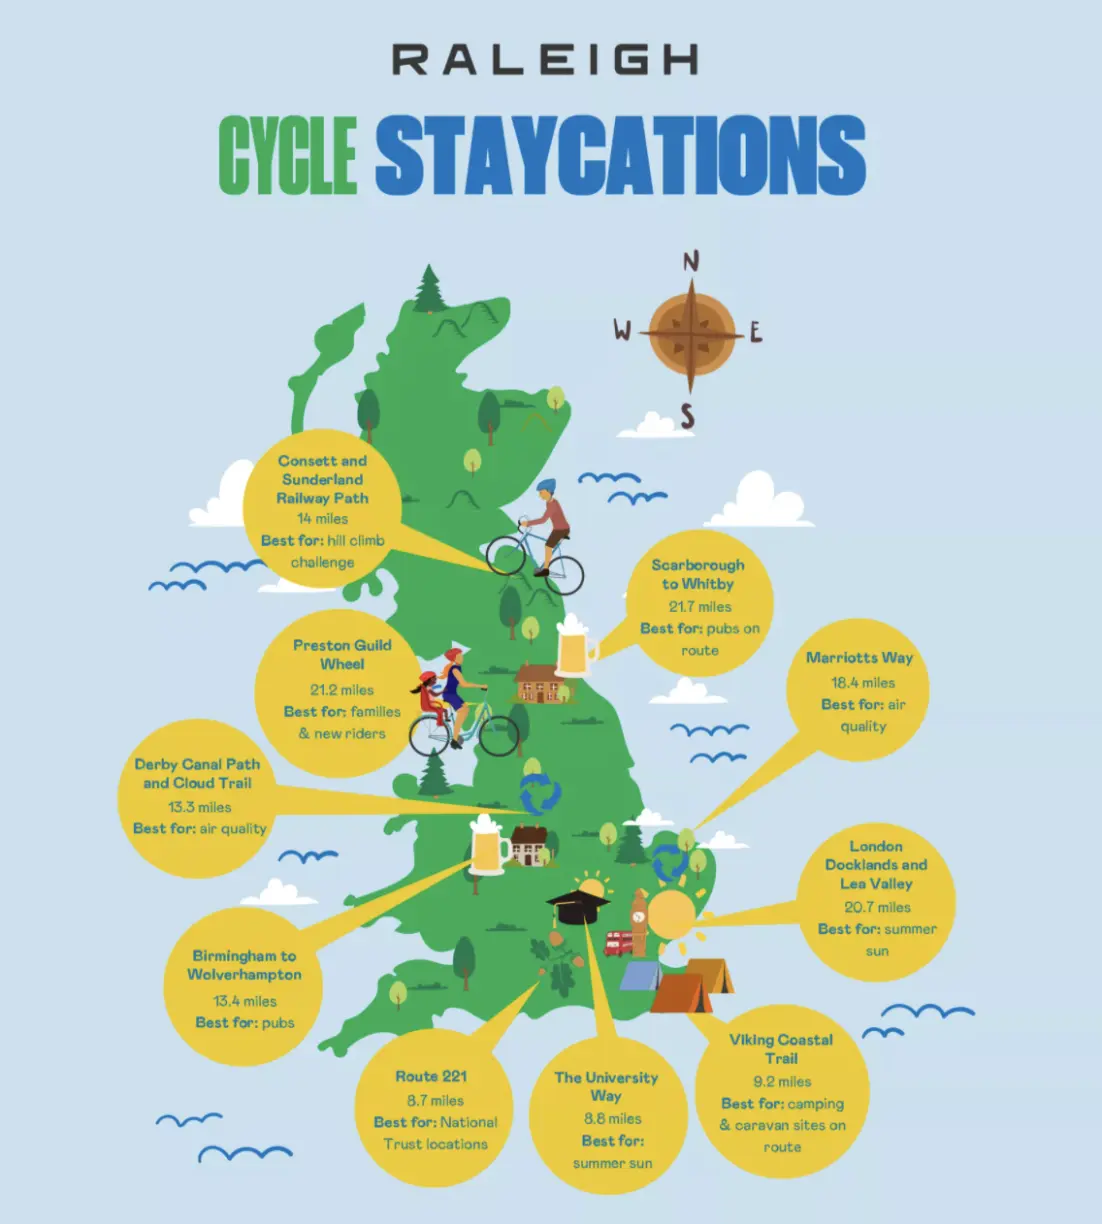 Best cycle staycation destinations in the uk